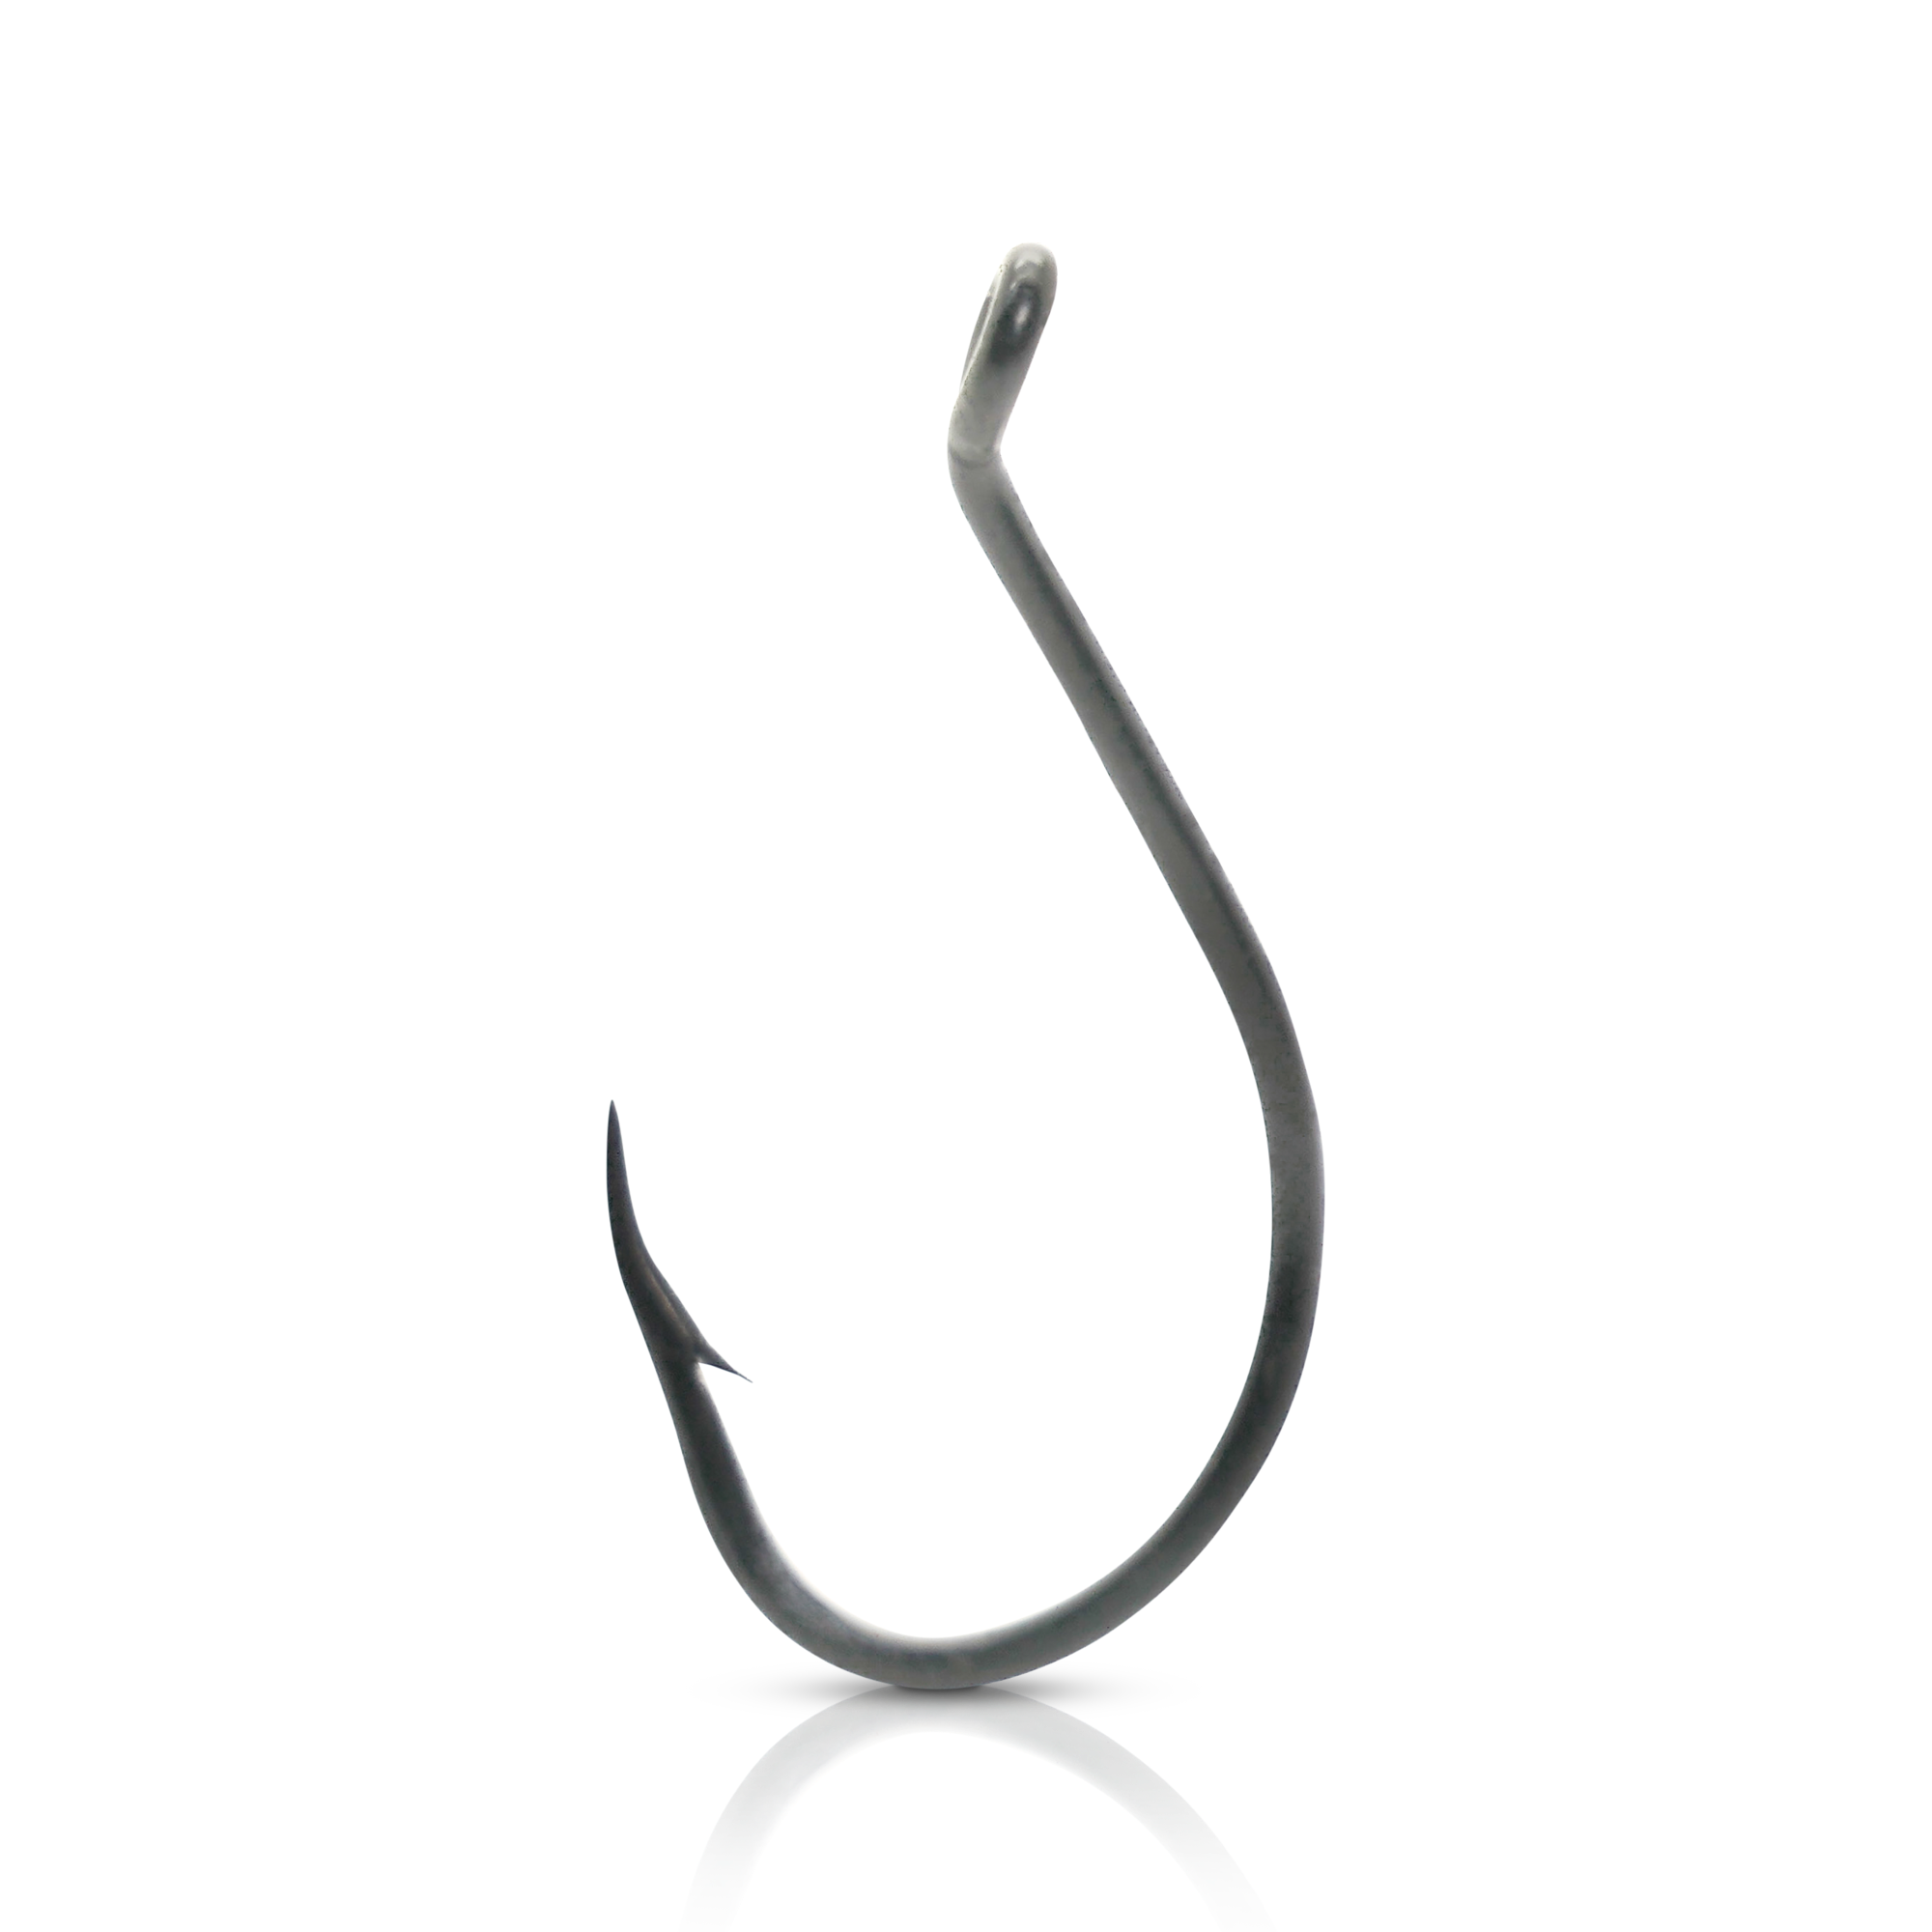 Hook anatomy (From Mustad website: www.mustad.no/abouthooks/index